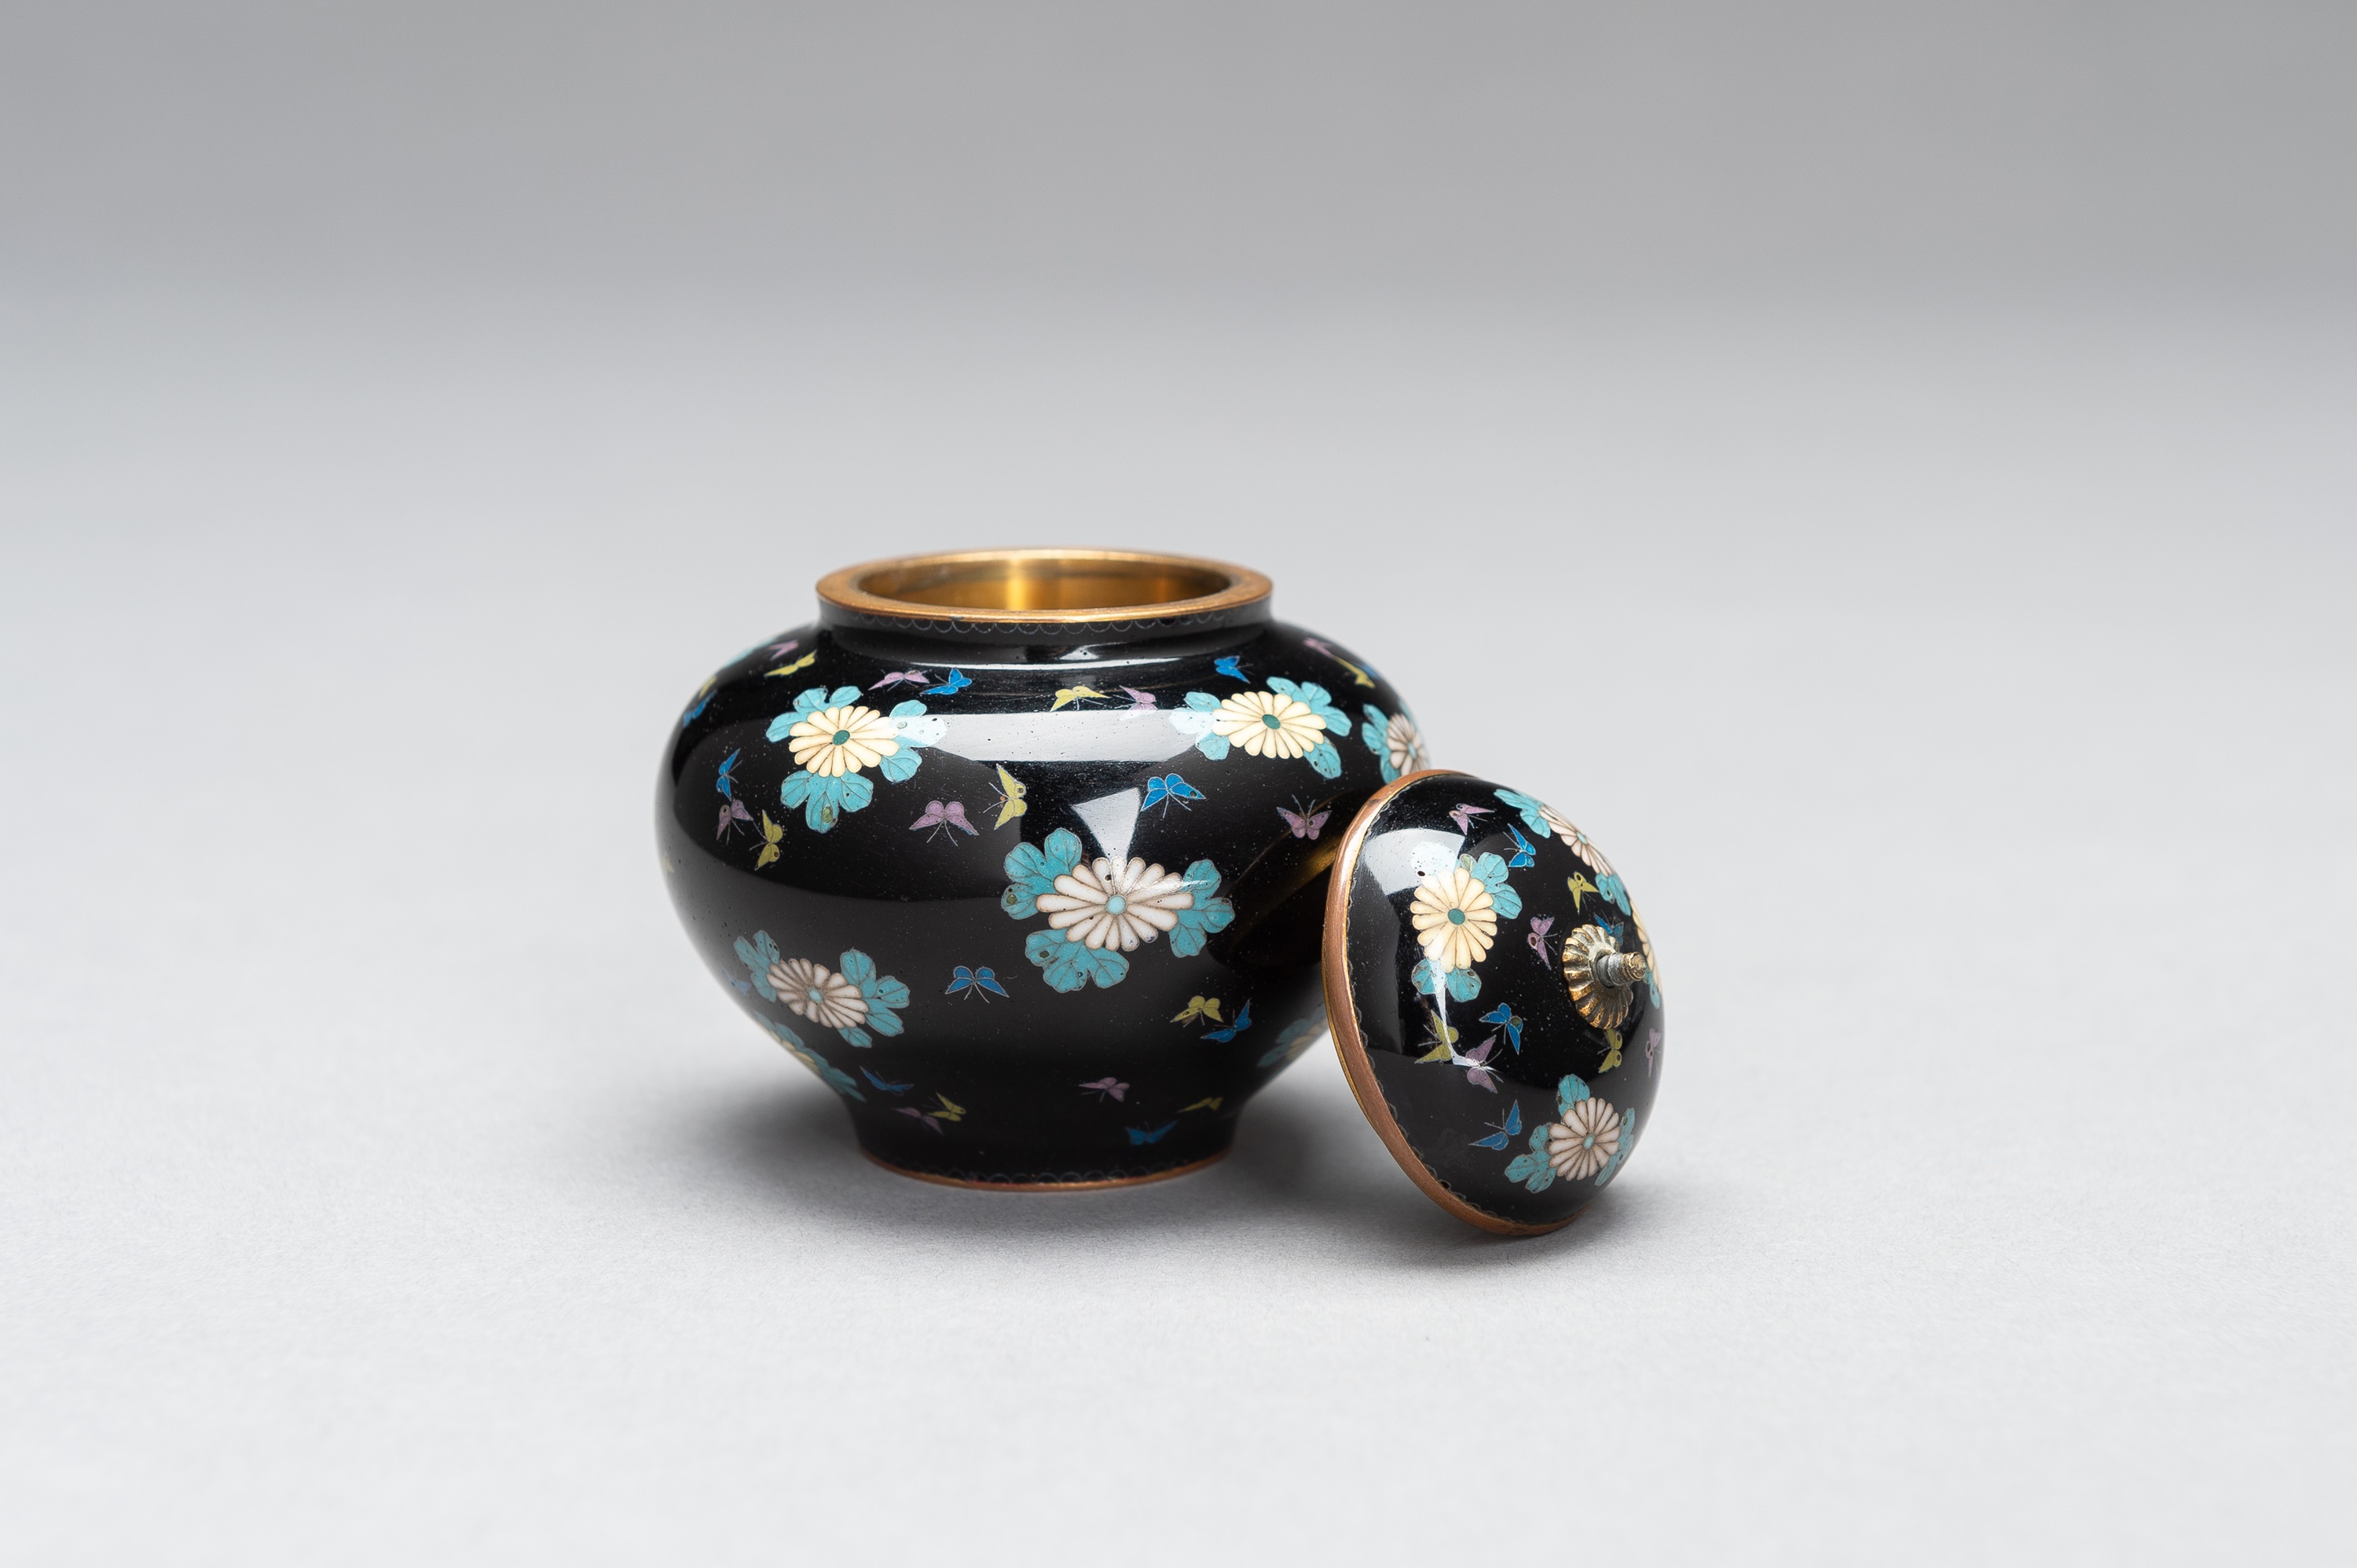 A CLOISONNE ENAMEL MINIATURE VASE WITH COVER - Image 6 of 9